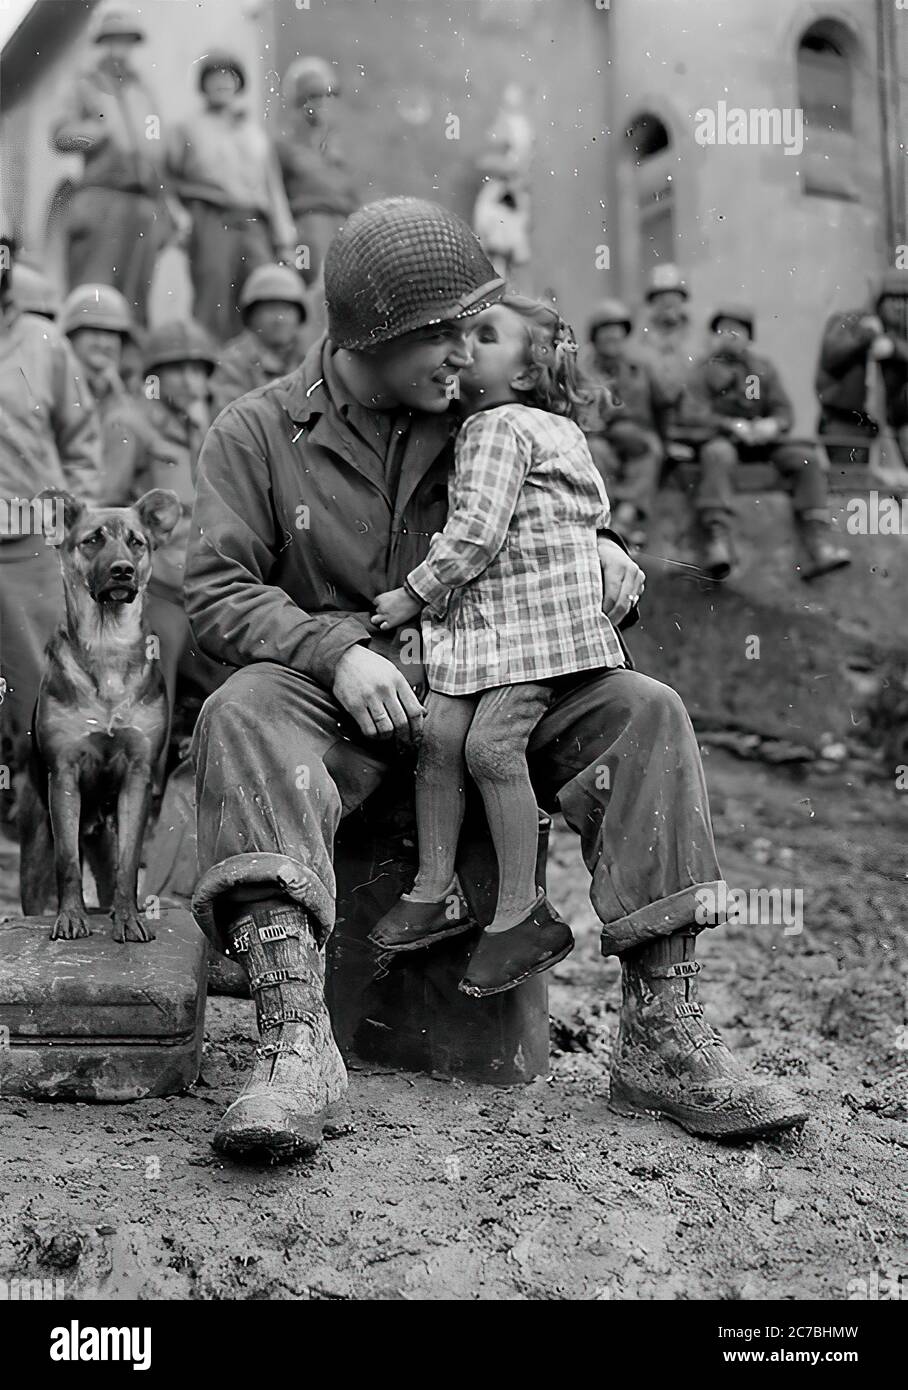 A Little French Girl Gives An American Soldier A Kiss On Valentineâ€™s Day, 1945 Stock Photo